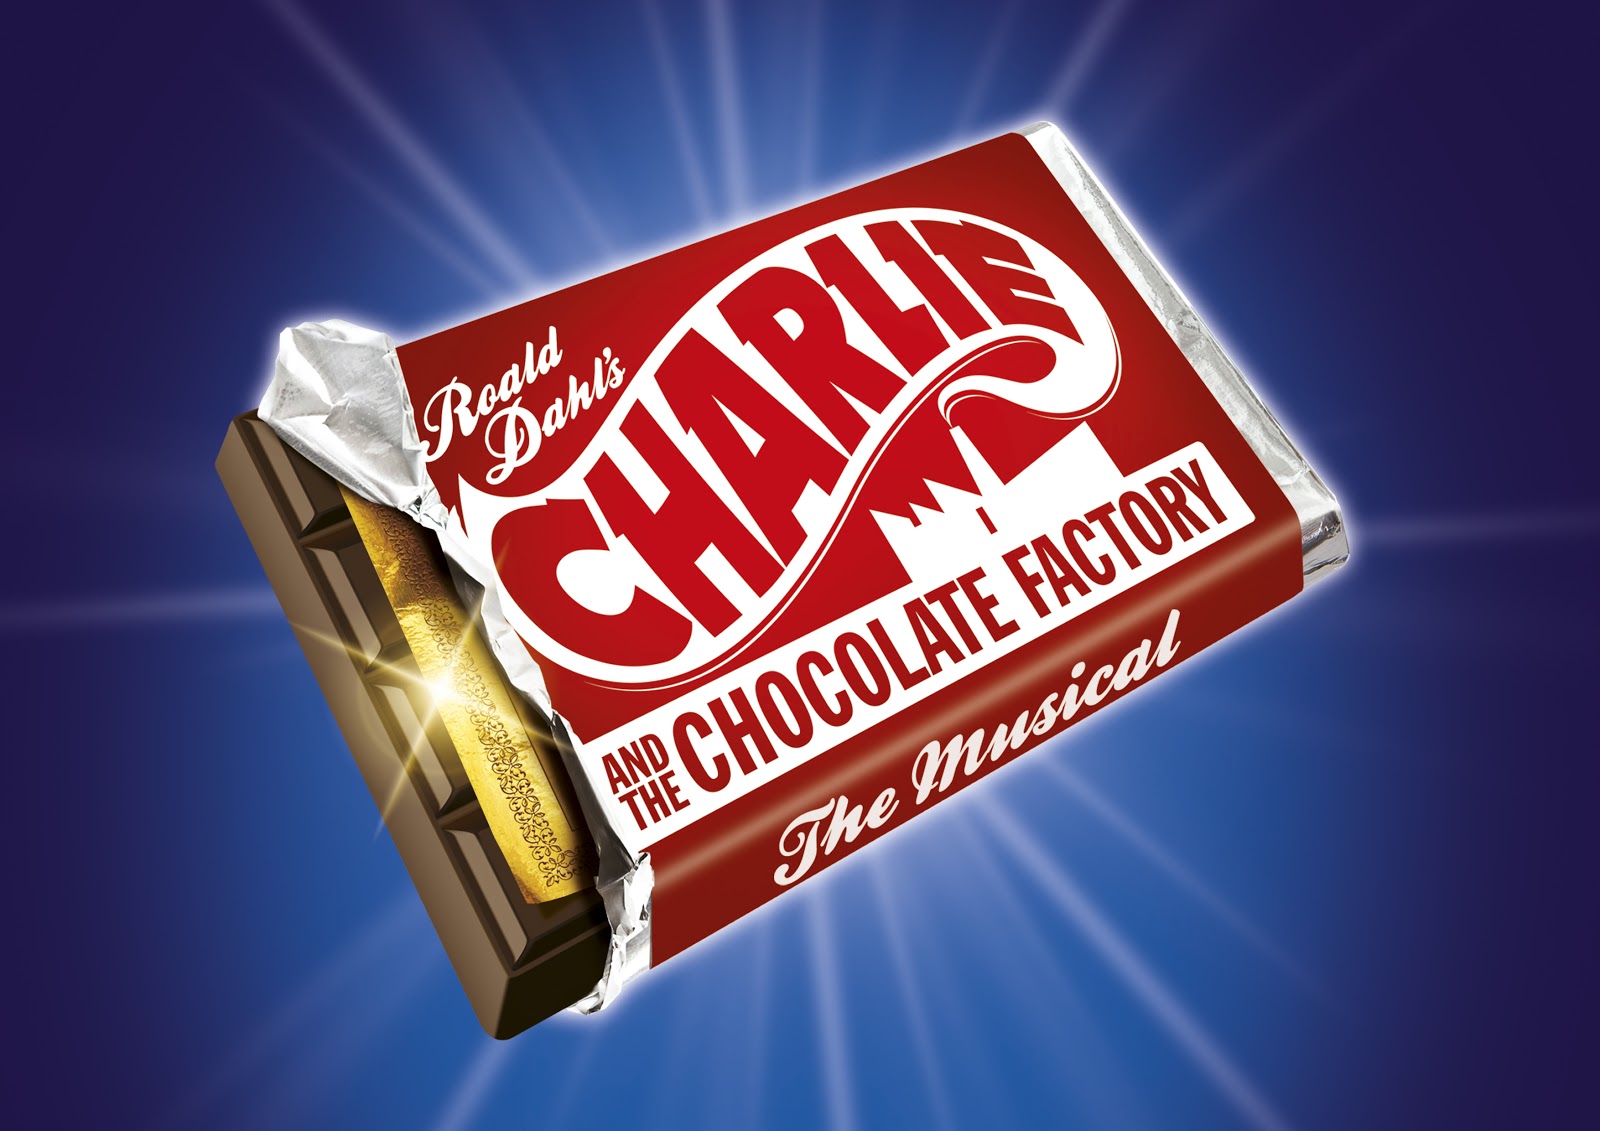 Charlie and the Chocolate Factory logo. Charlie and the Chocolate Factory Musical logo. Charlie and the Chocolate Factory book. Мюзикл шоколад